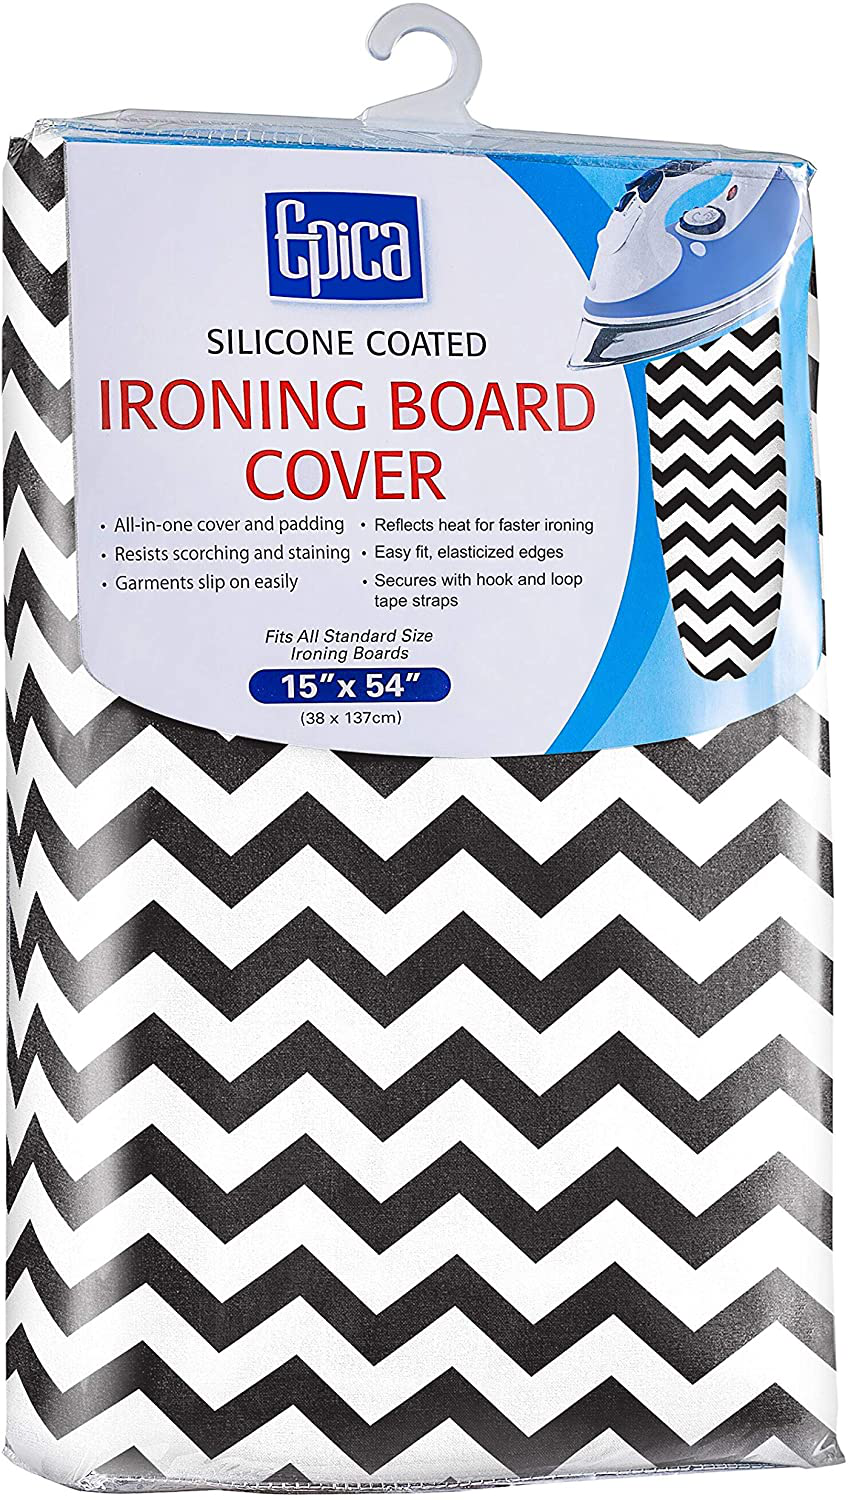 Epica Silicone Coated Ironing Board Cover- Resists Scorching and Staining - 15"x54" (Board not Included) (White and Grey Lattice)